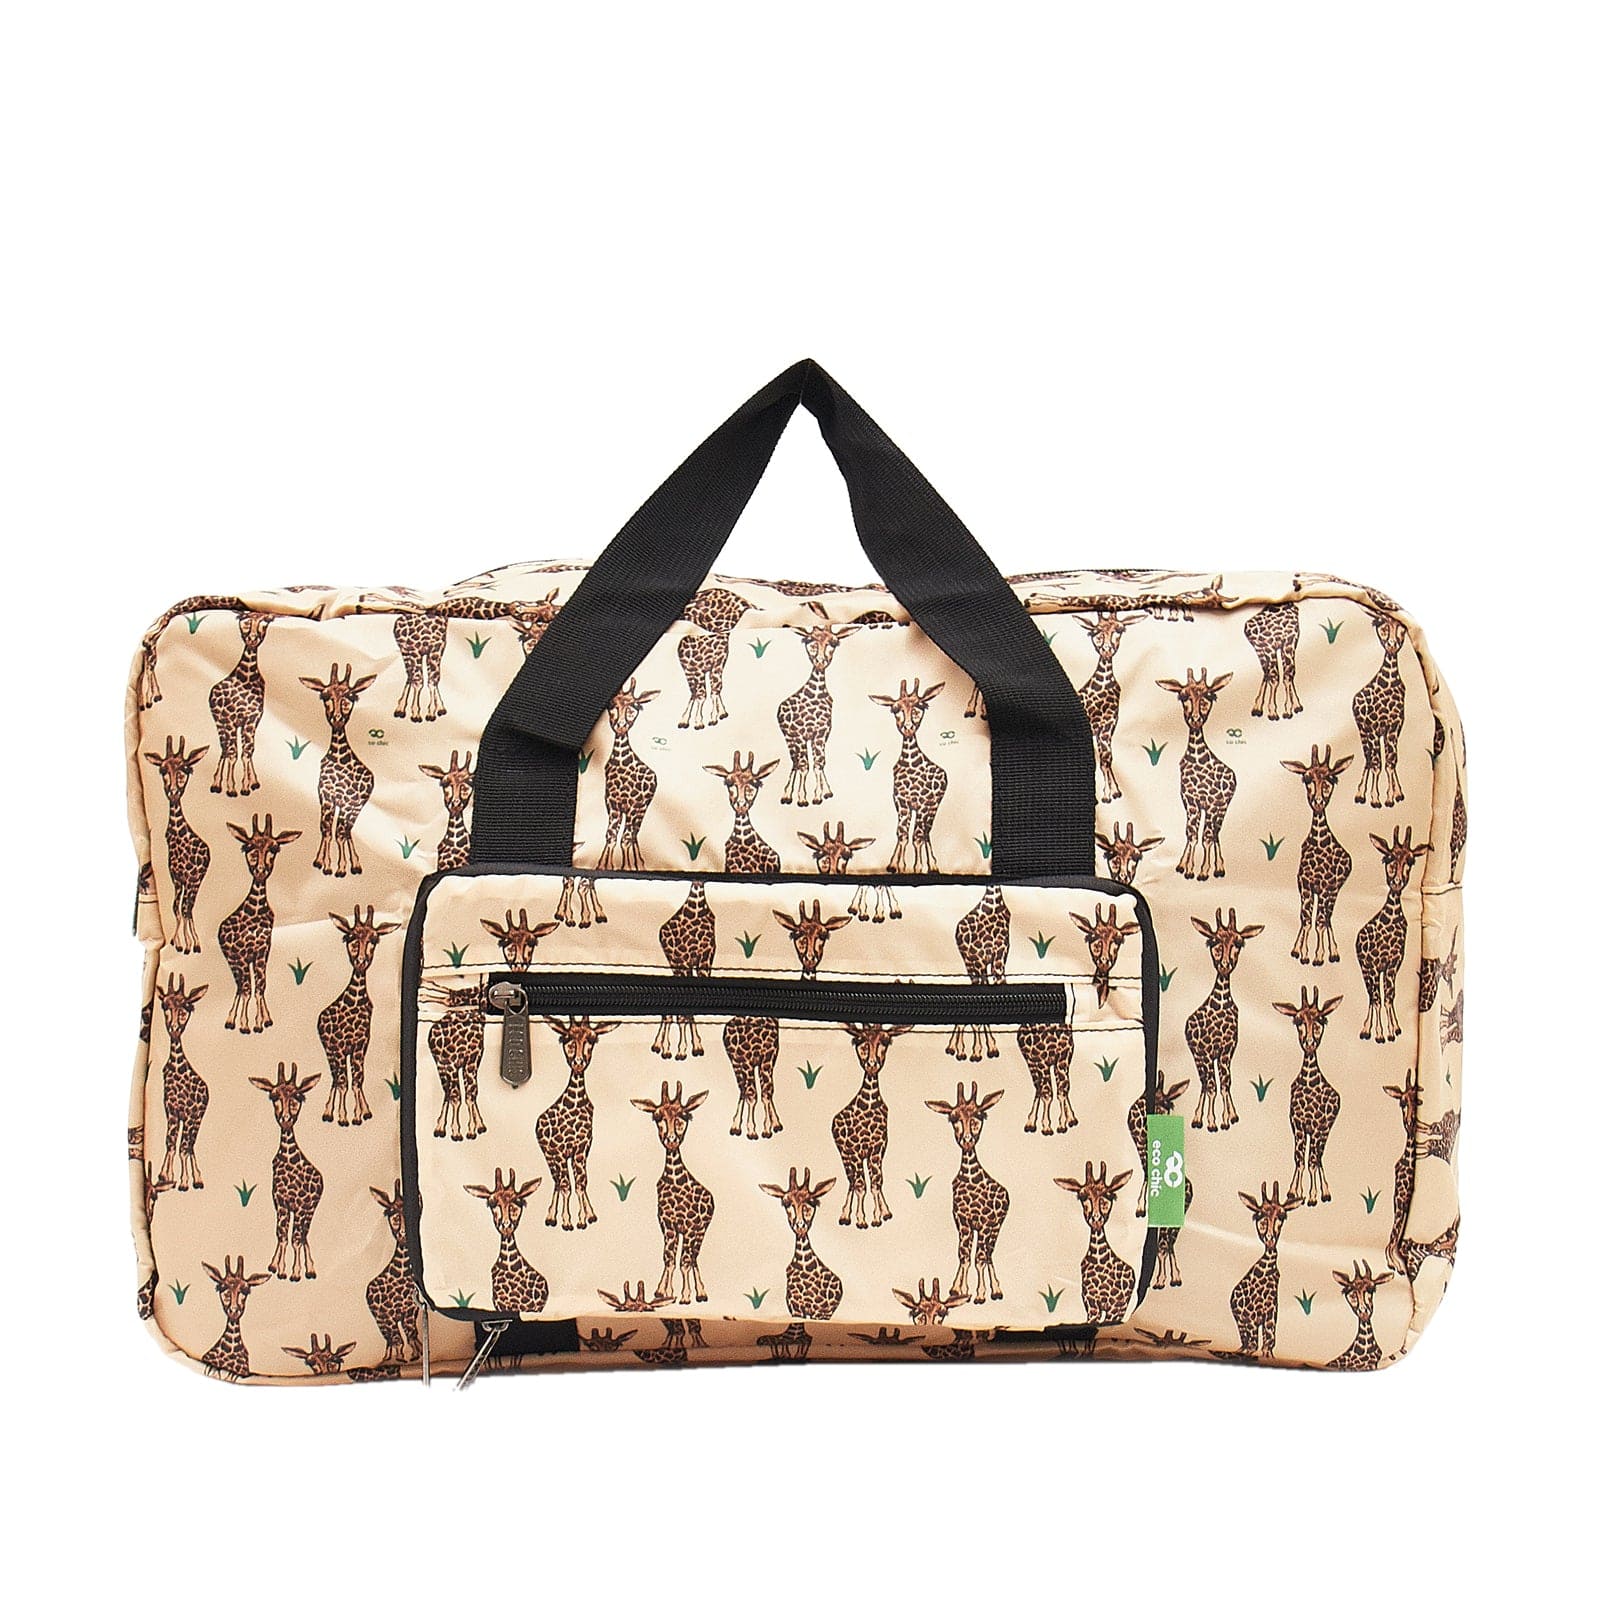 Eco Chic Beige Eco Chic Lightweight Foldable Holdall Giraffes